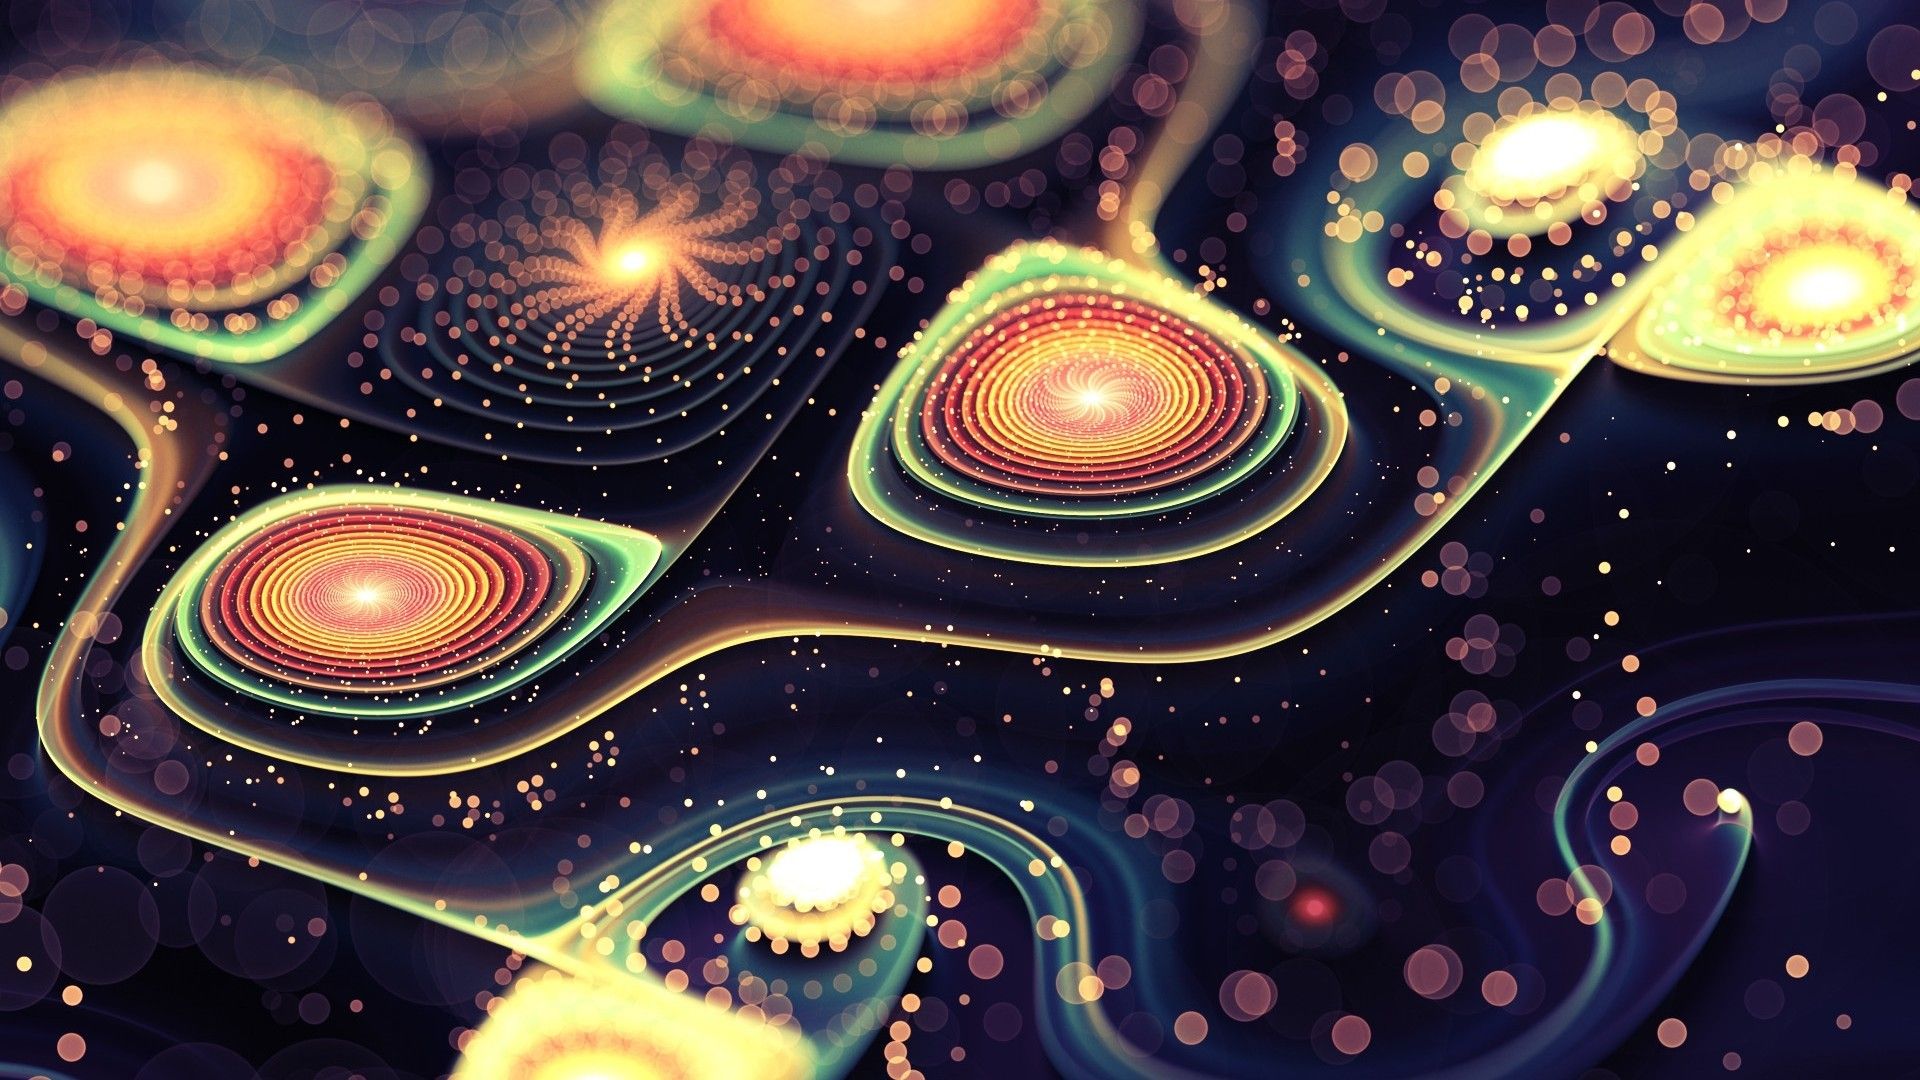 Trippy 1920x1080 Wallpapers - Wallpaper Cave